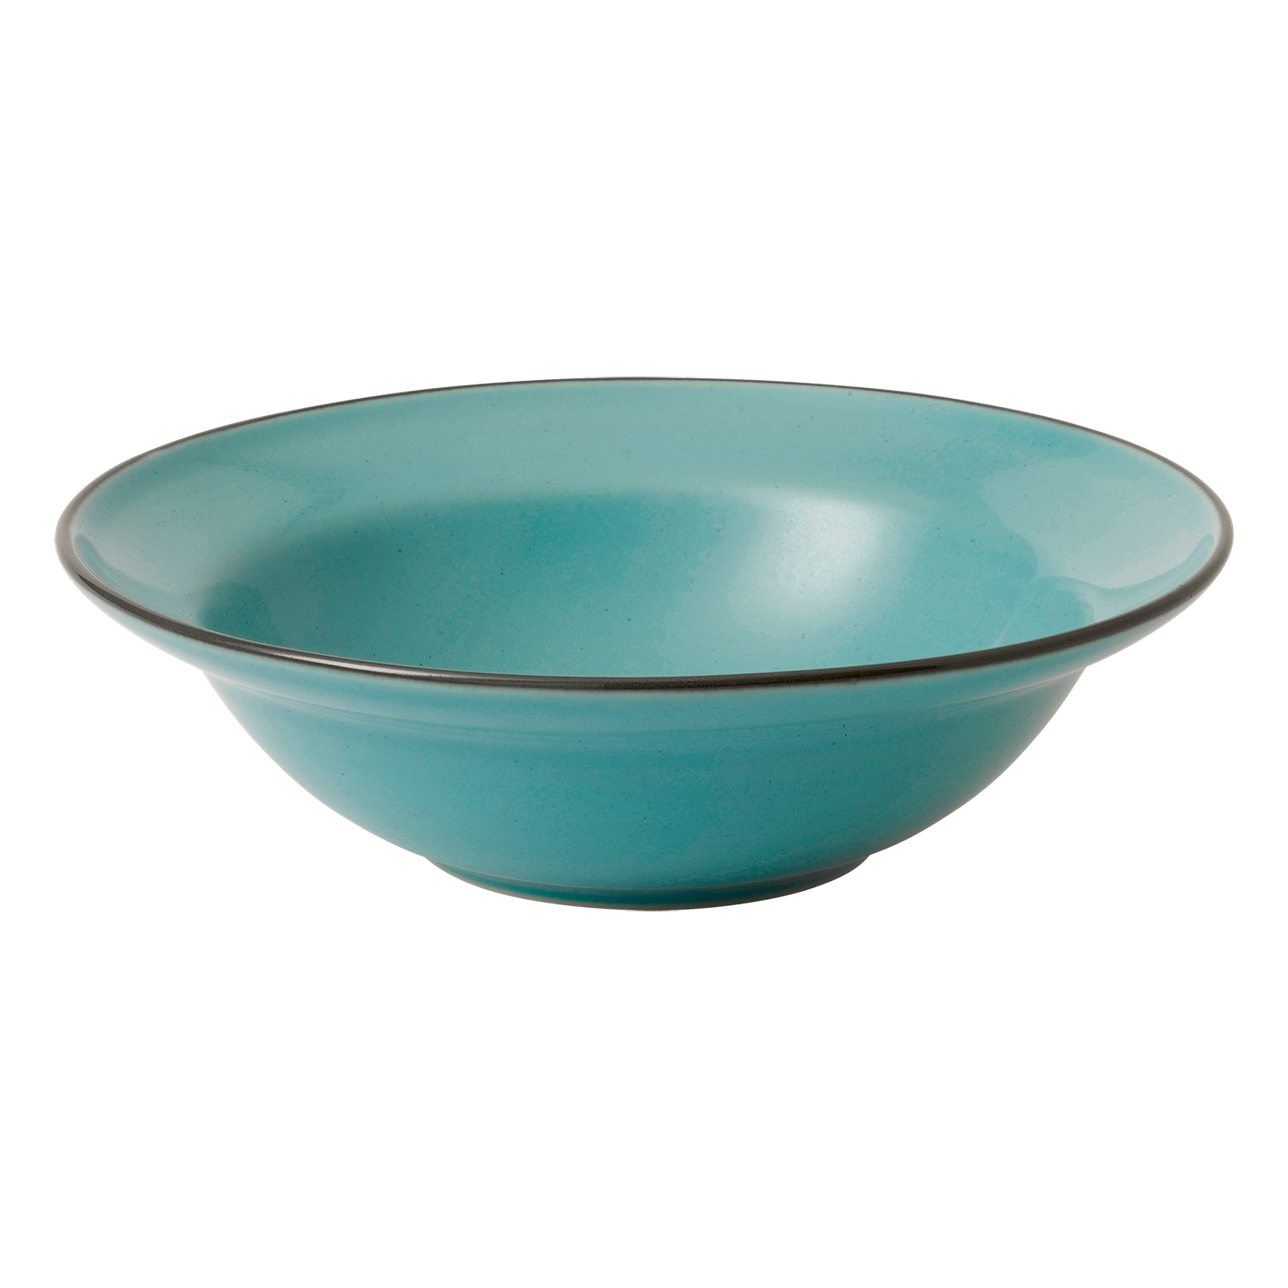 Union Street Teal Blue Cereal Bowl